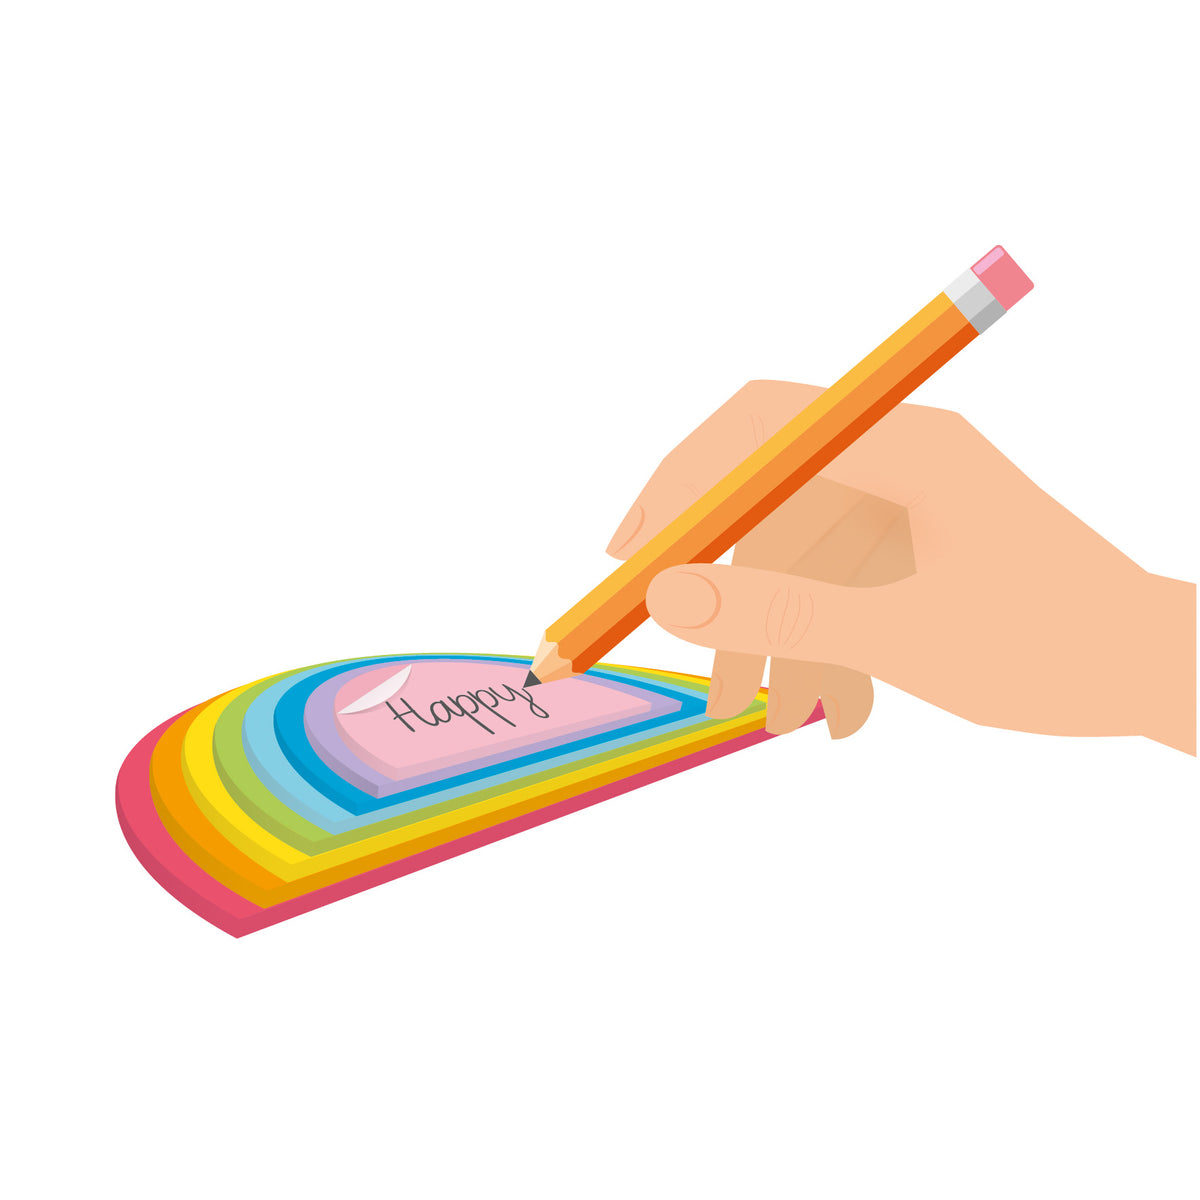 An image of a hand holding a pencil writing on a rainbow shaped sticky notes pad.